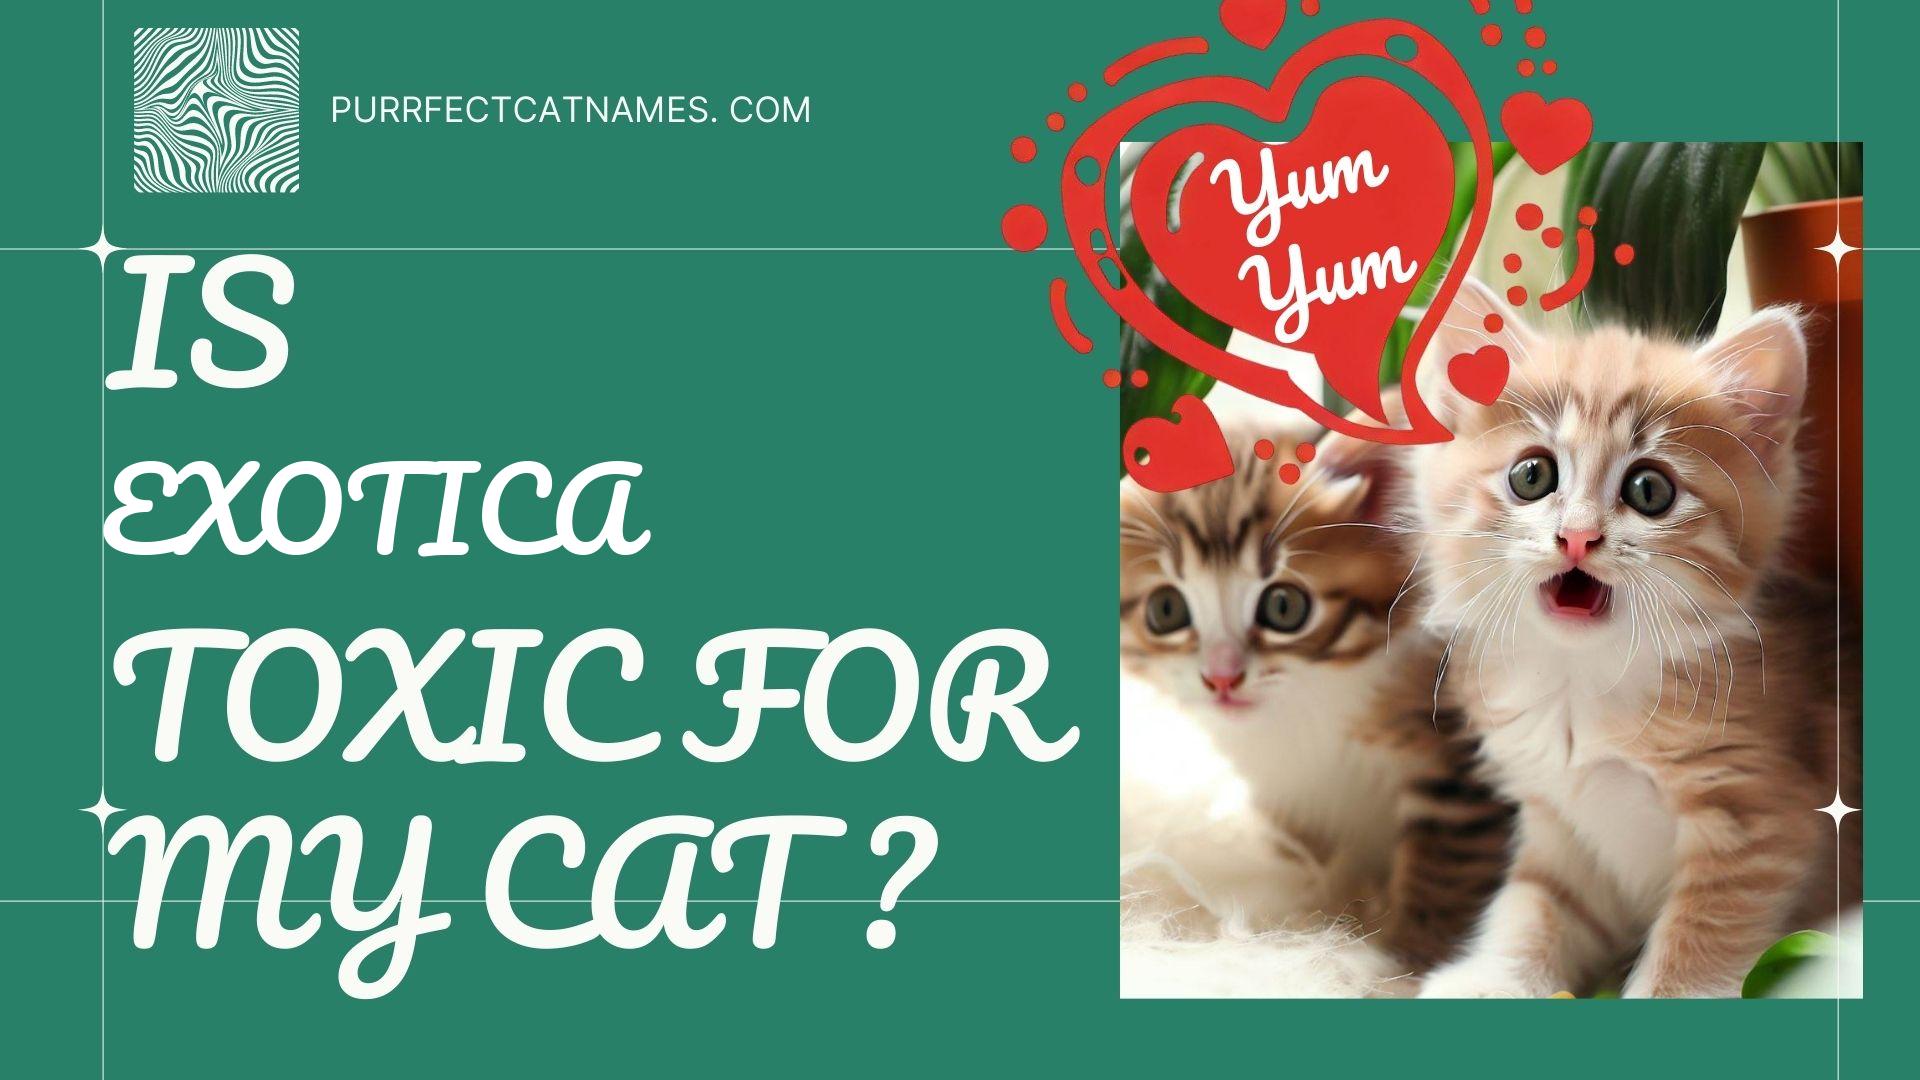 IsExotica plant toxic for your cat